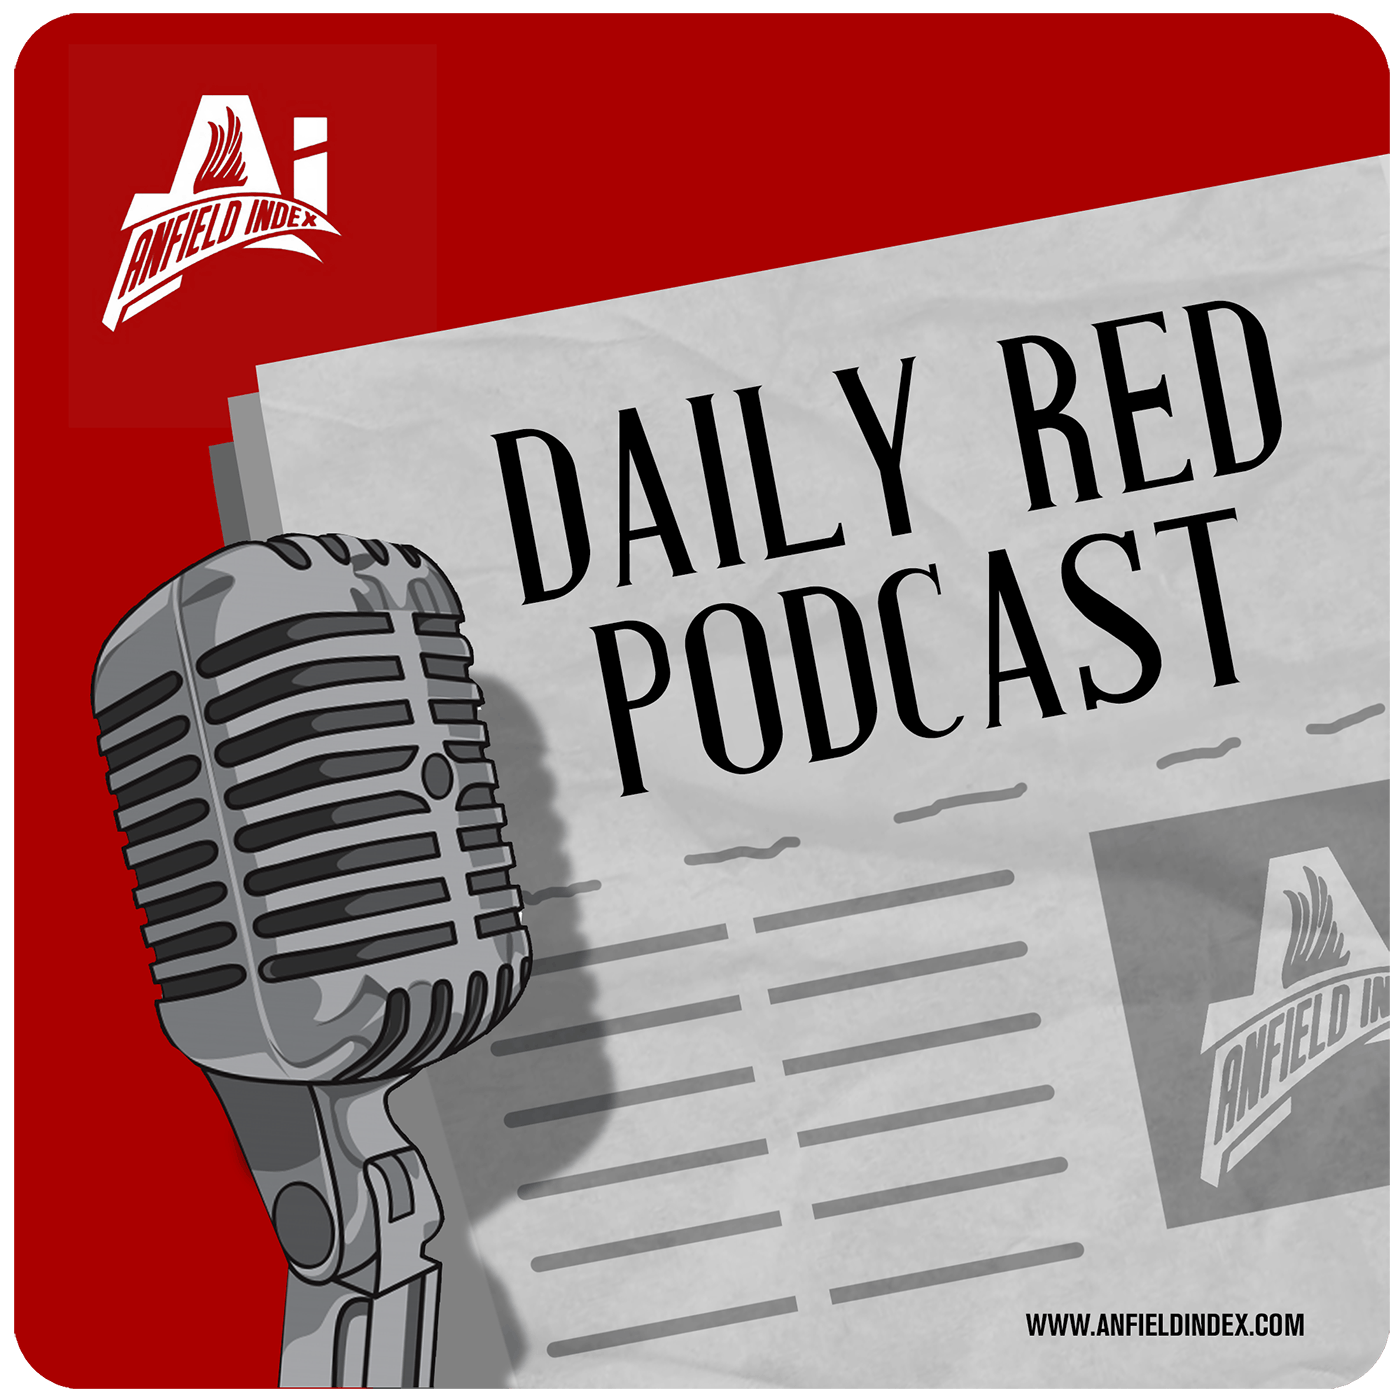 Slot Press Conference & Bundesliga Players: Daily Red Podcast